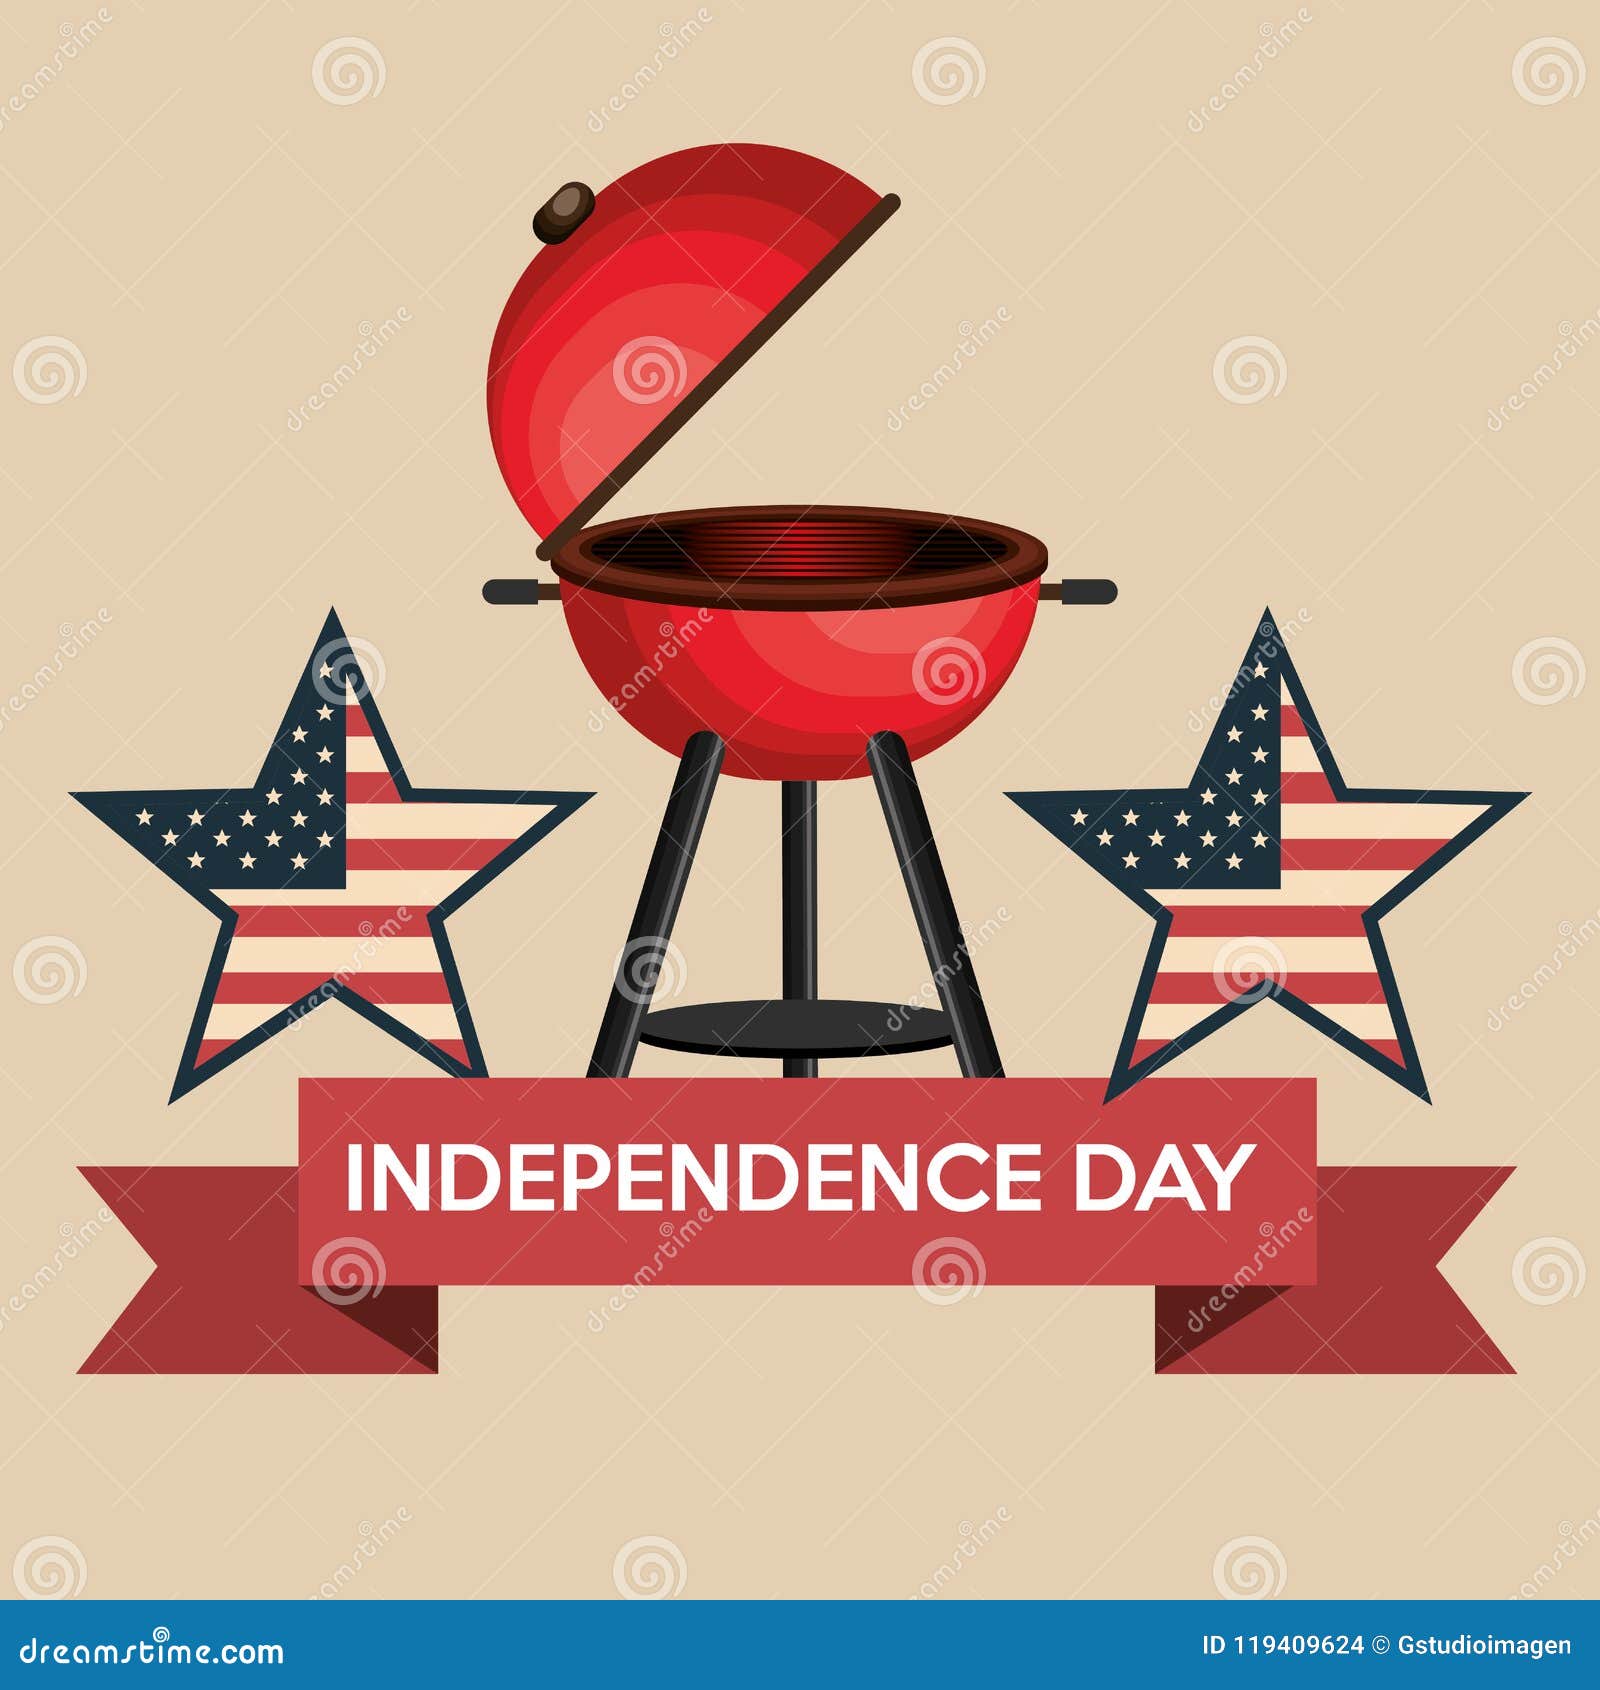 USA independence day barbeque party vector illustration design